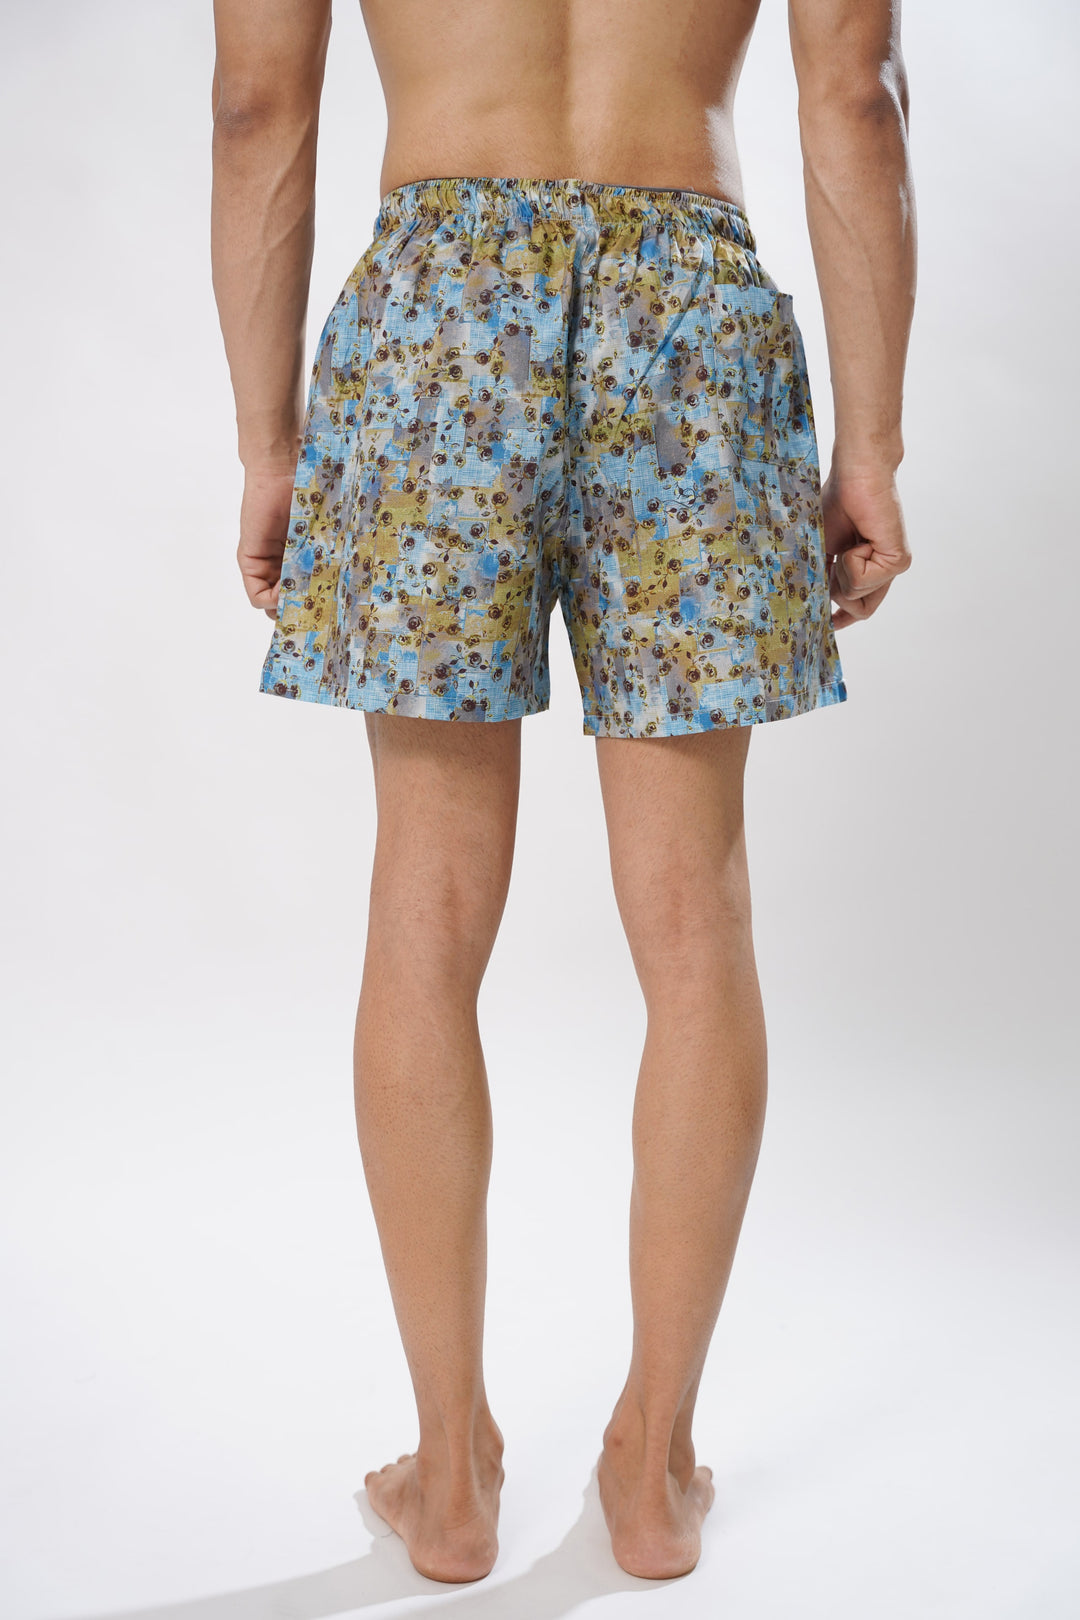 YELLOW AND BLUE FLOWER ALL OVER PRINTED MENS BOXERS